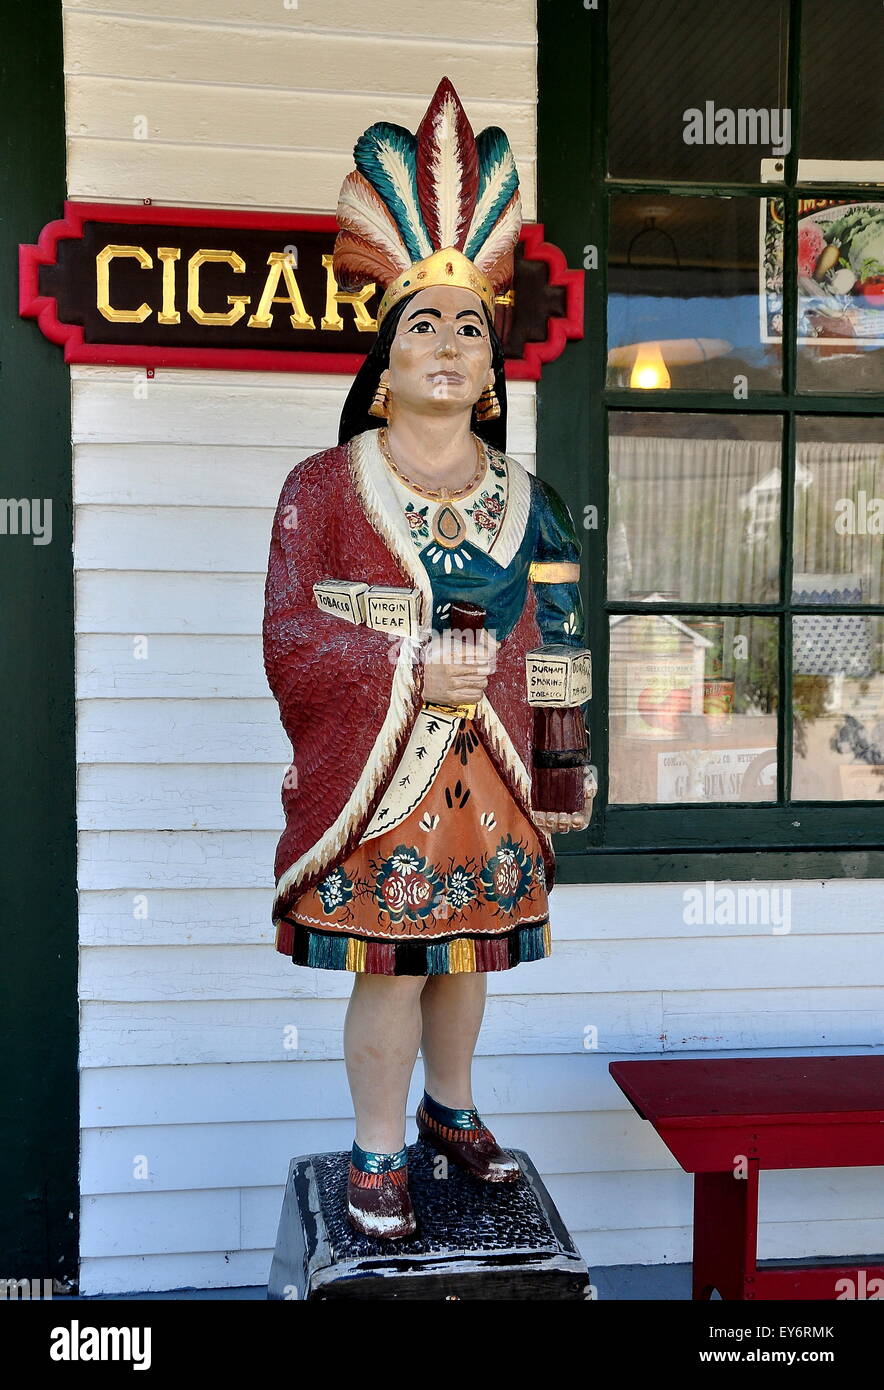 Mystic, Connecticut:  A wooden Cigar Store Indian on the porch of the Geo. H. Stone & Co. general store at Mystic Seaport Stock Photo